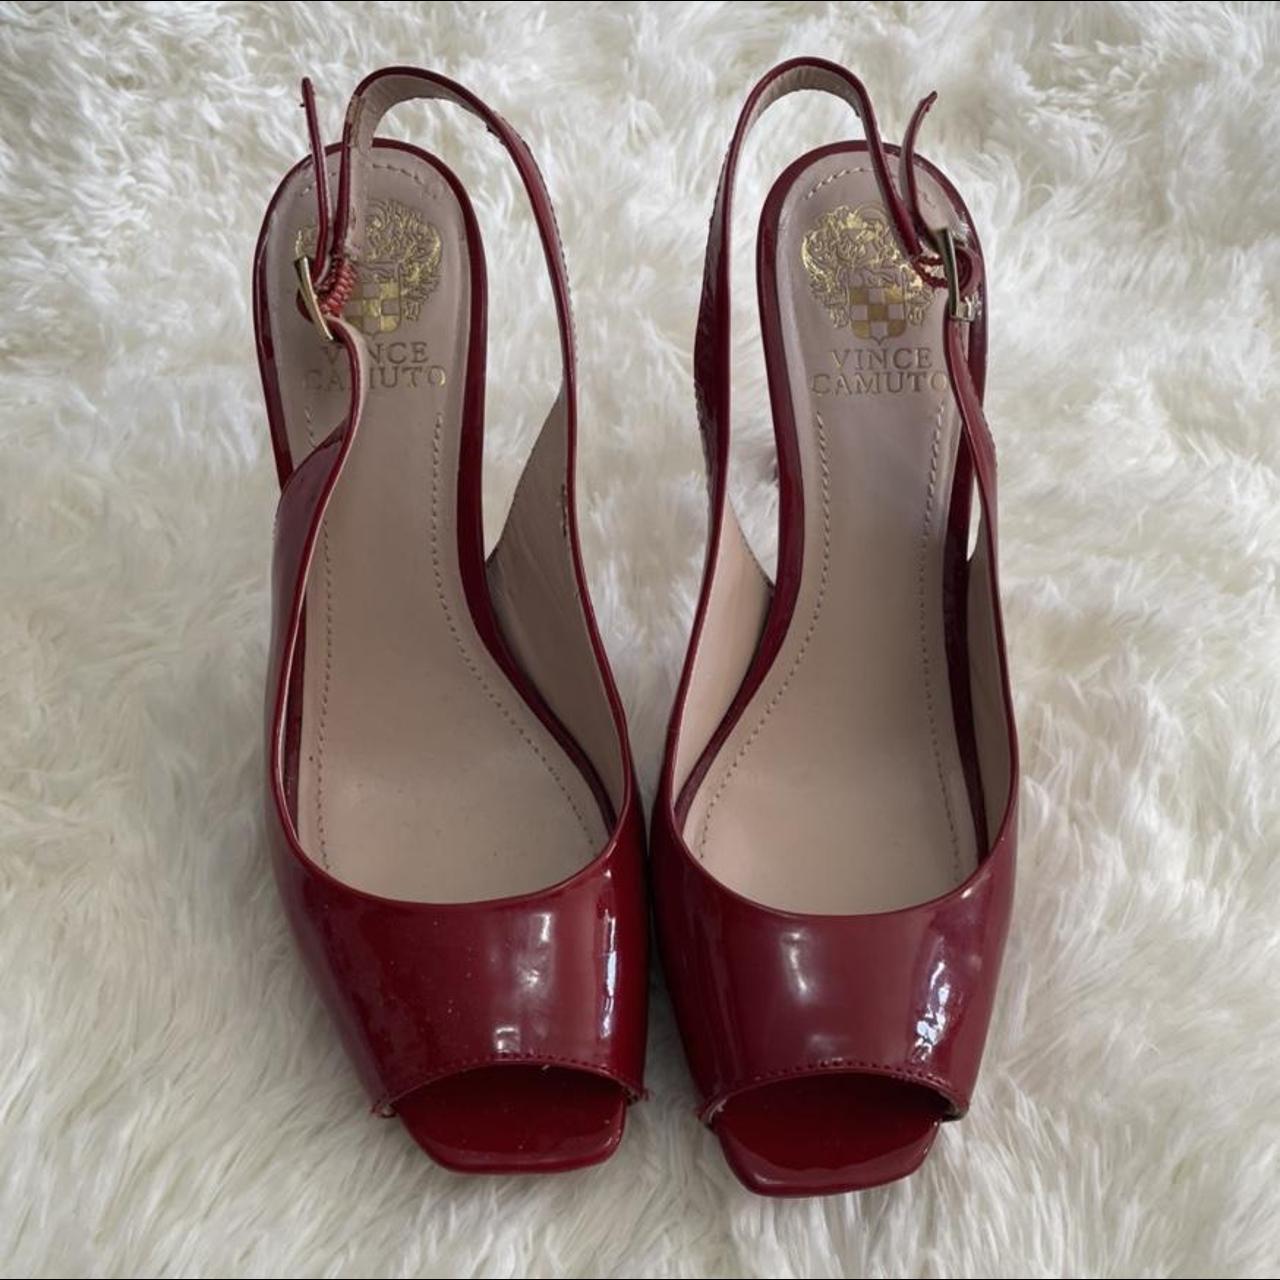 Vince Camuto Women's Red and Gold Courts